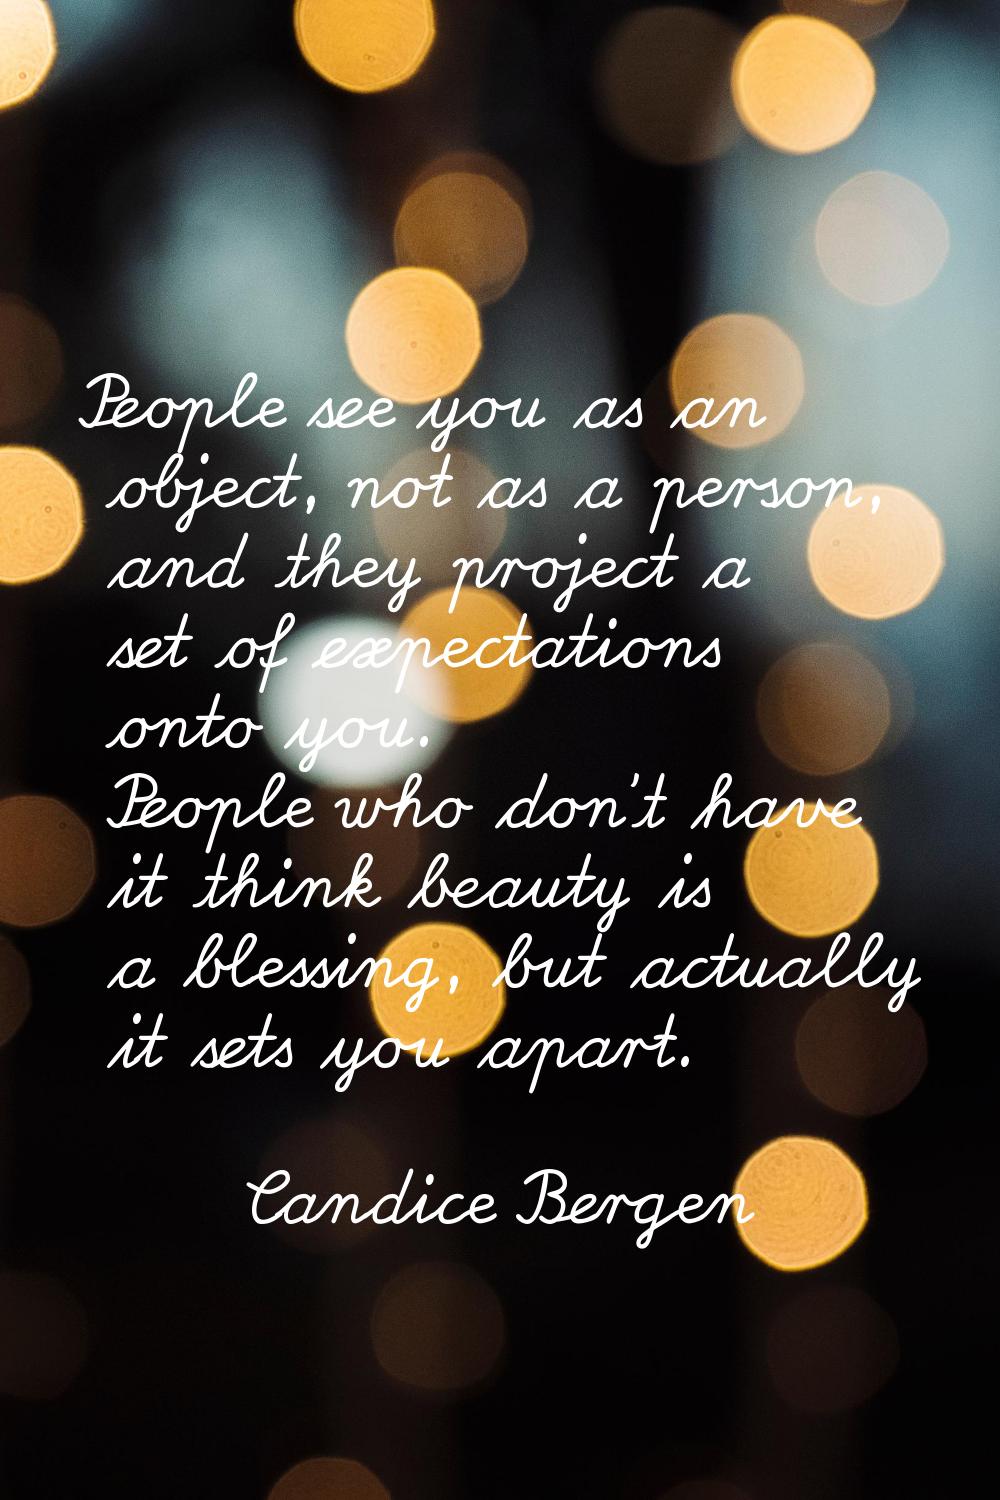 People see you as an object, not as a person, and they project a set of expectations onto you. Peop